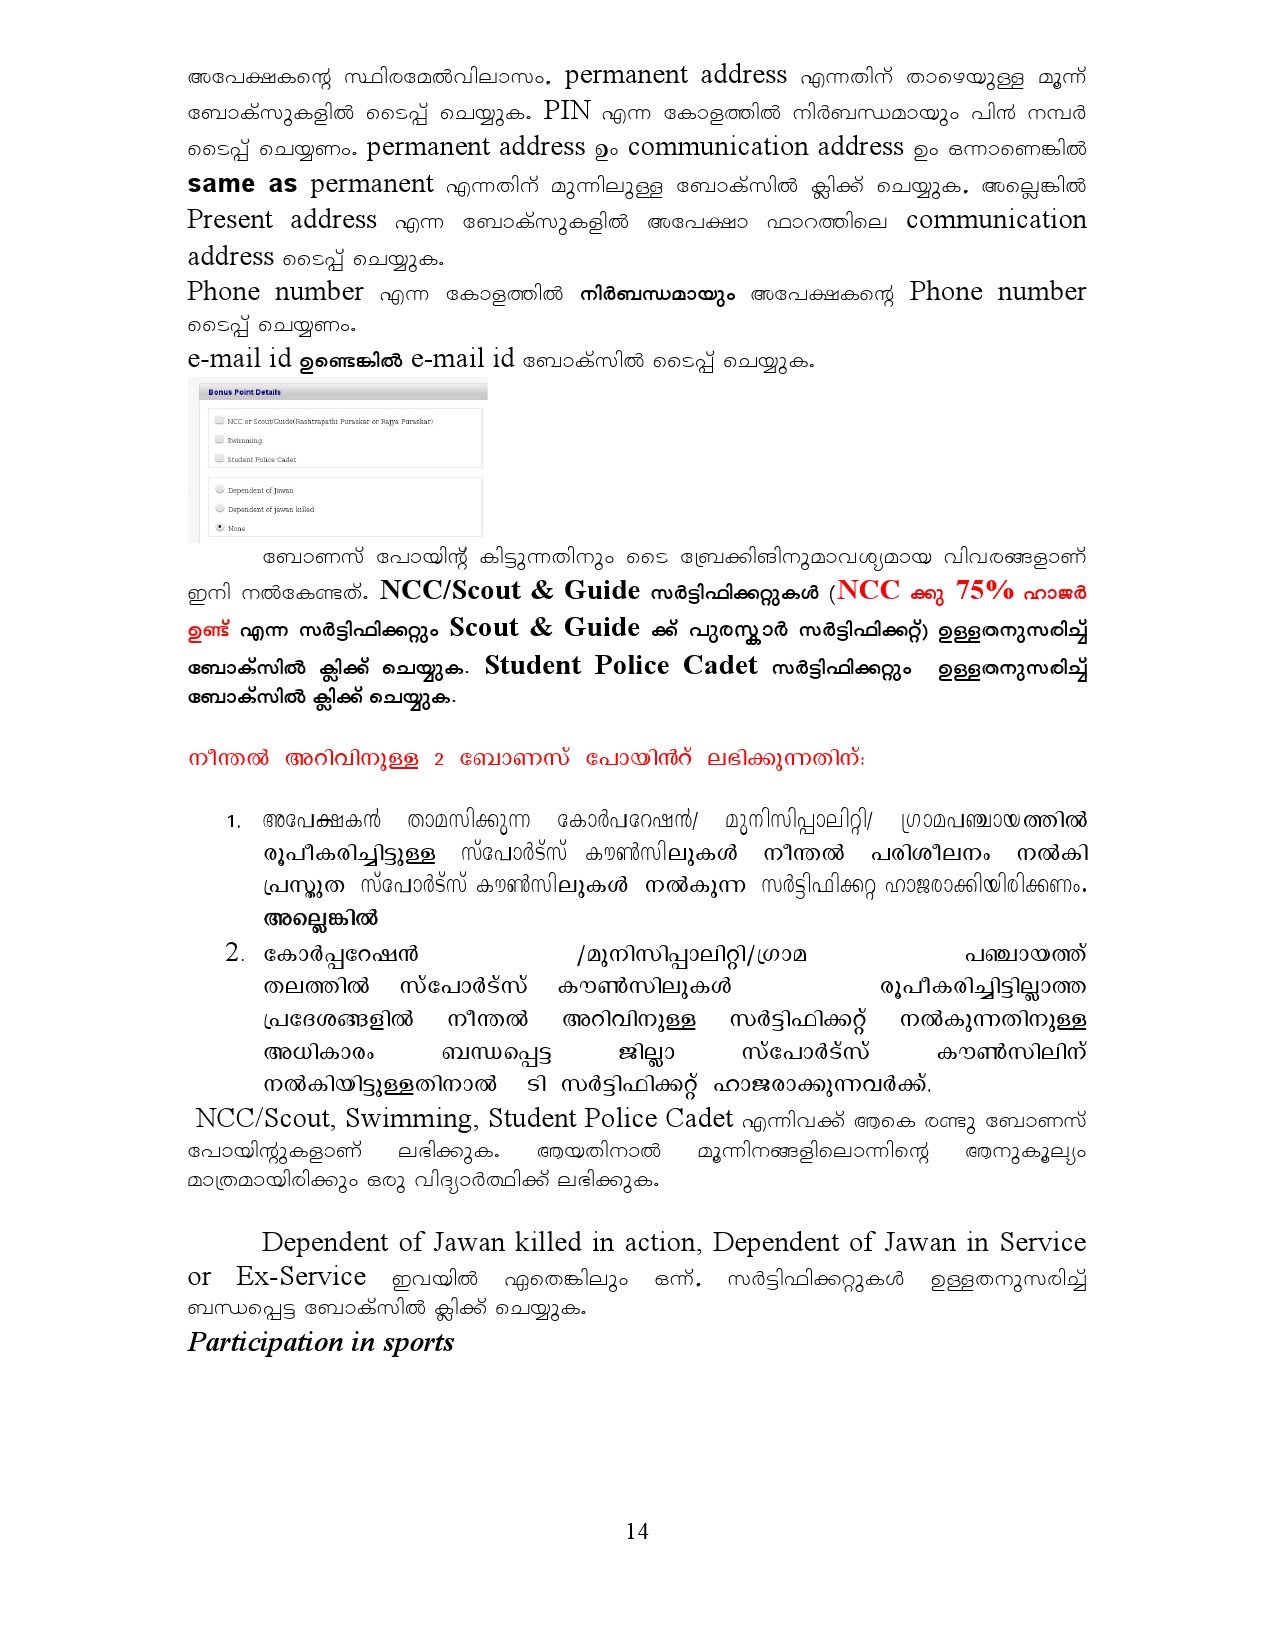 Higher Secondary School Online Application Manual in Malayalam - Notification Image 14